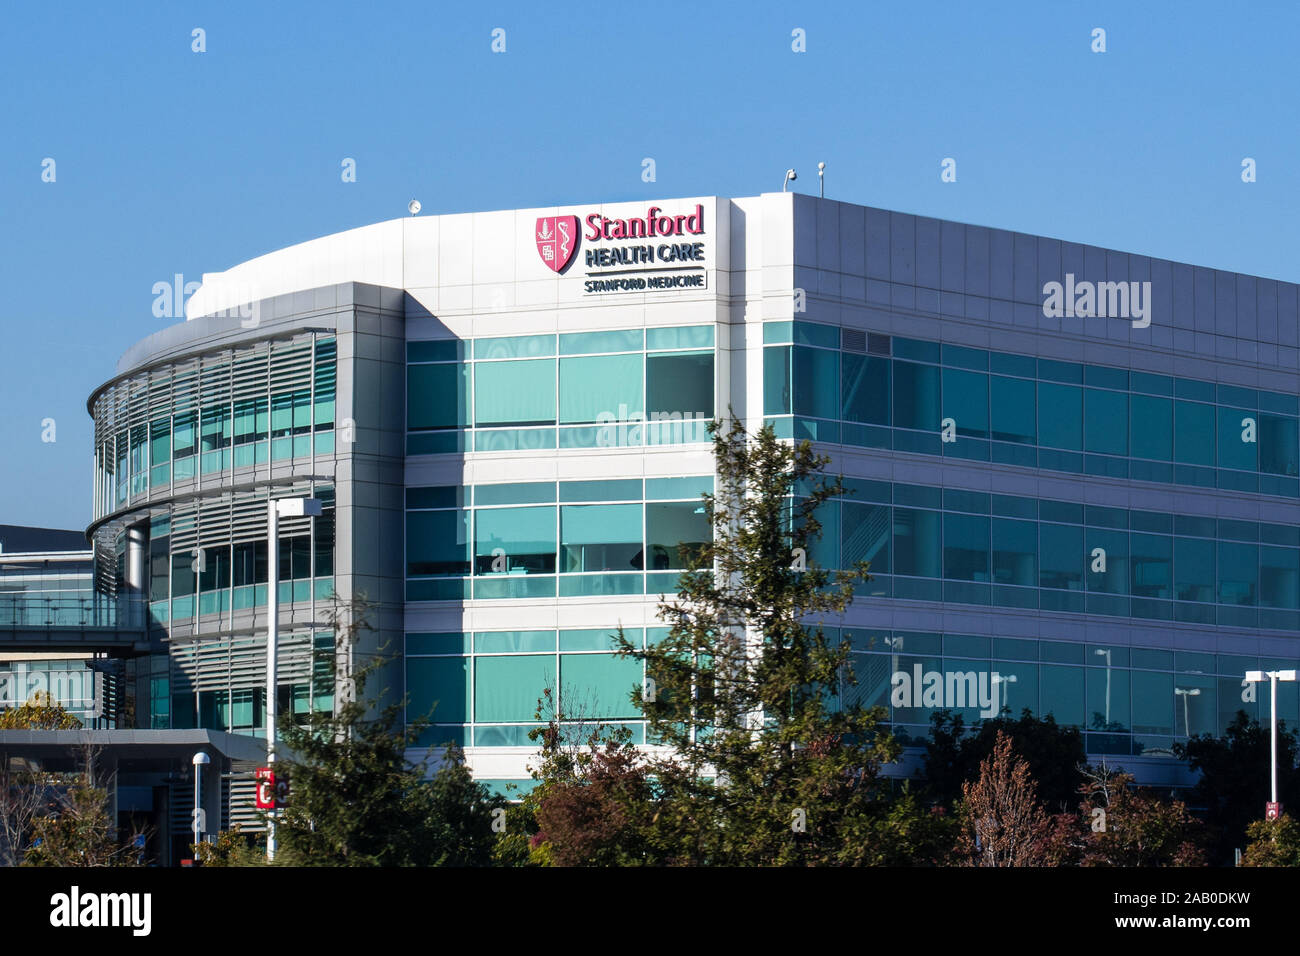 nov 2 2019 redwood city ca usa stanford health care facility stanford health care comprises a network of medical facilities and doctors locate 2AB0DKW